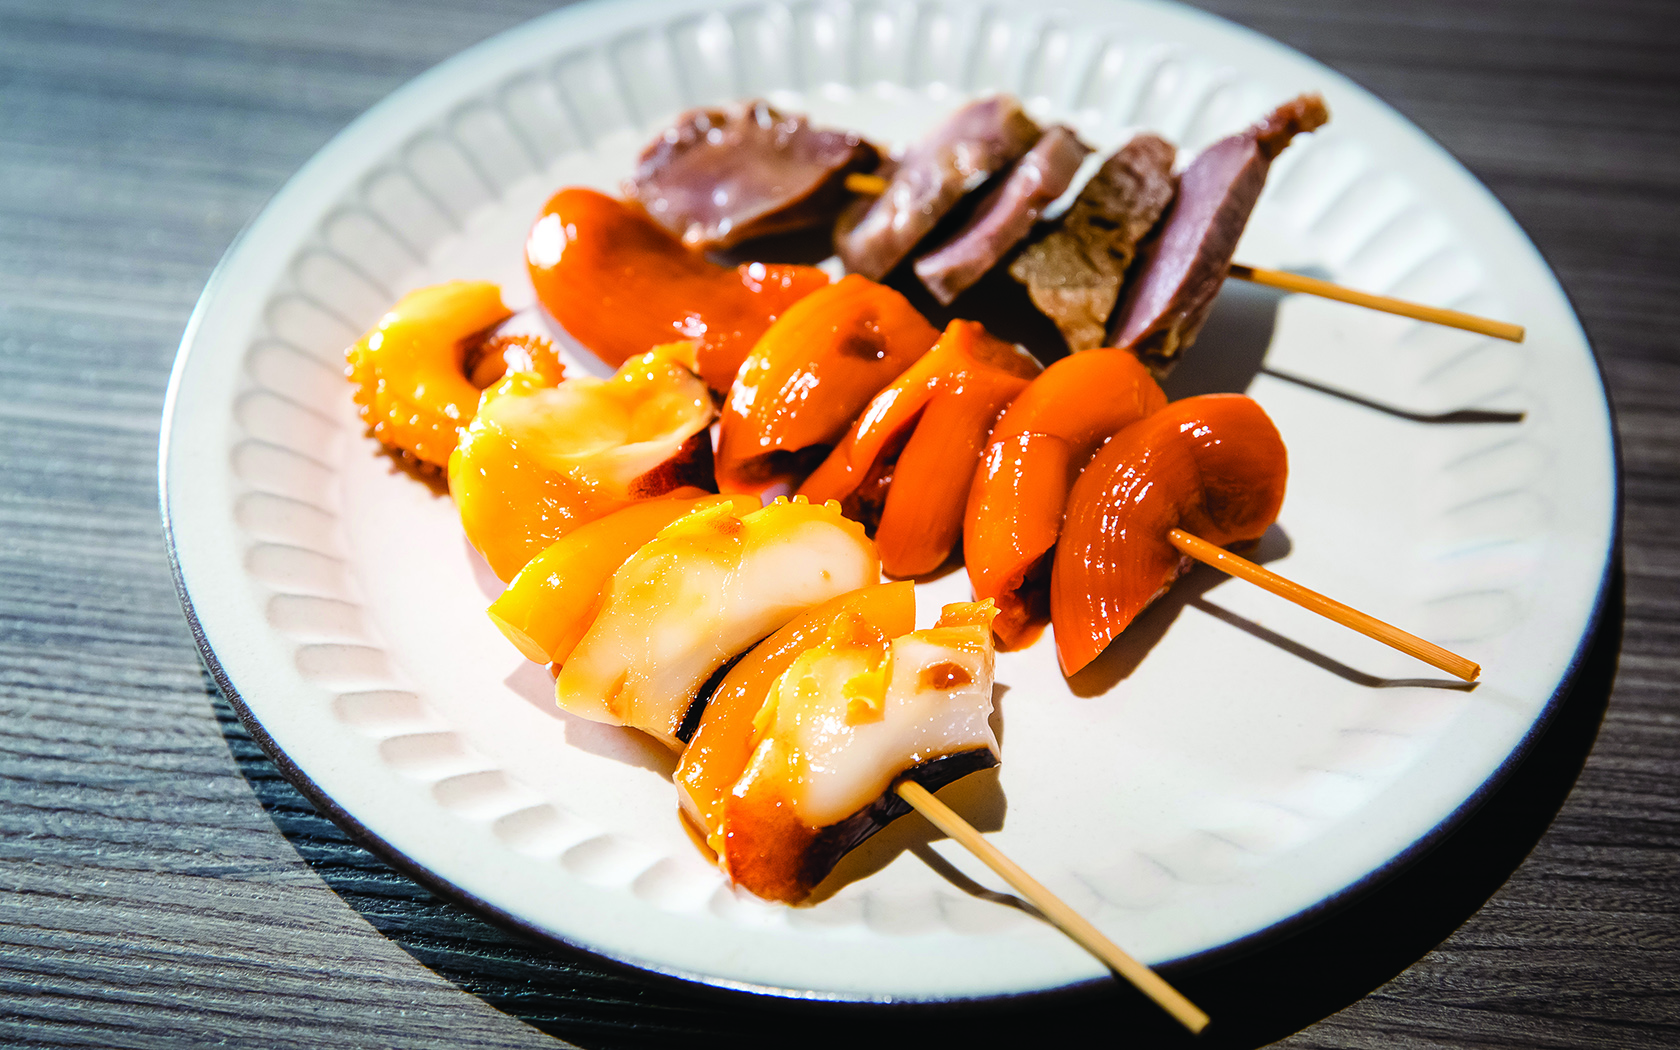 Fat Boy octopus and duck stomach skewers